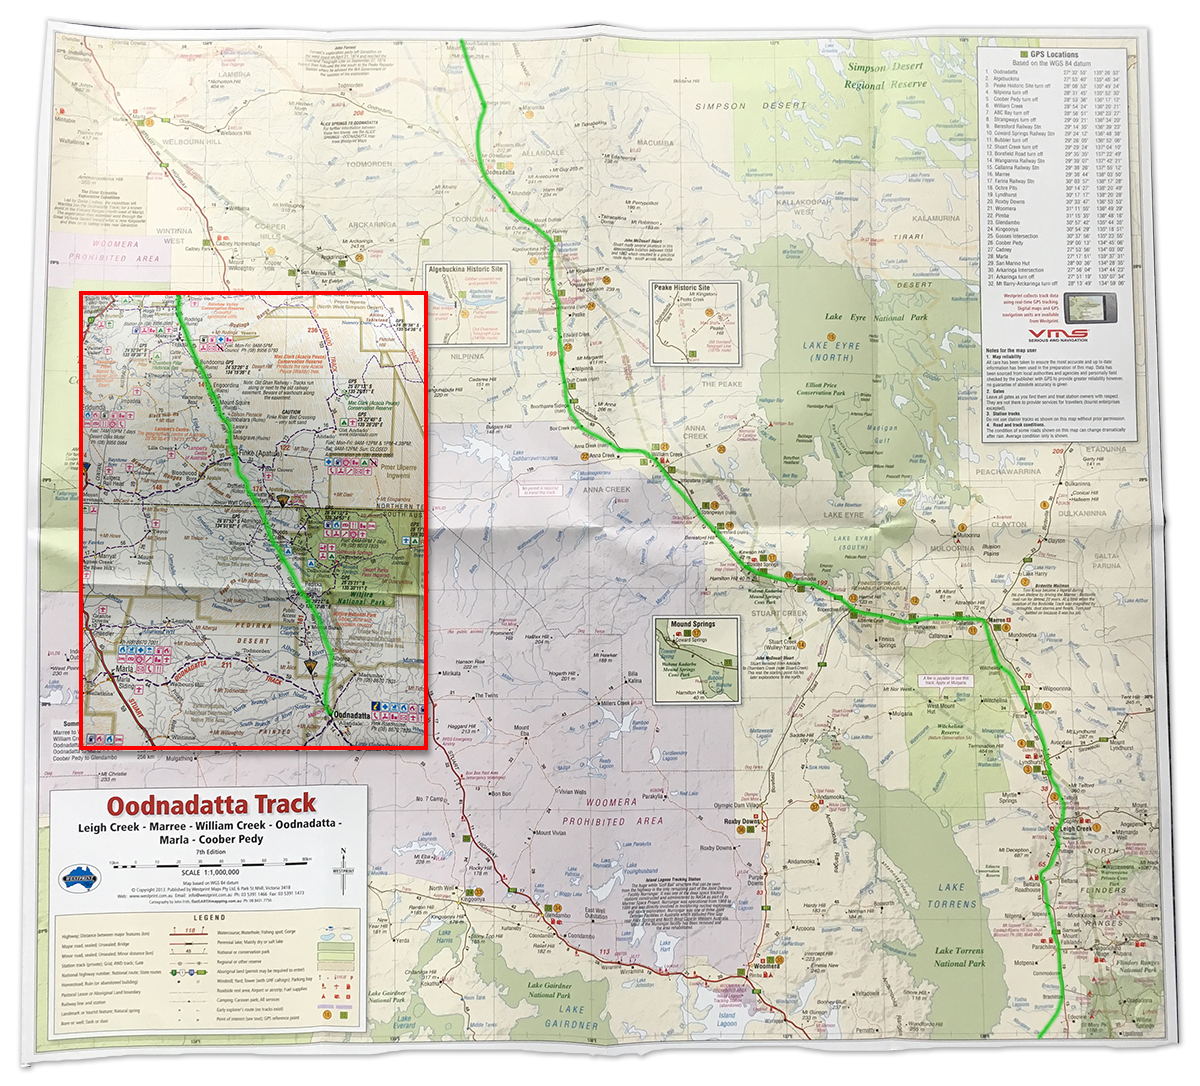 Oodnadatta Track / Old Ghan Heritage Trail Full Map